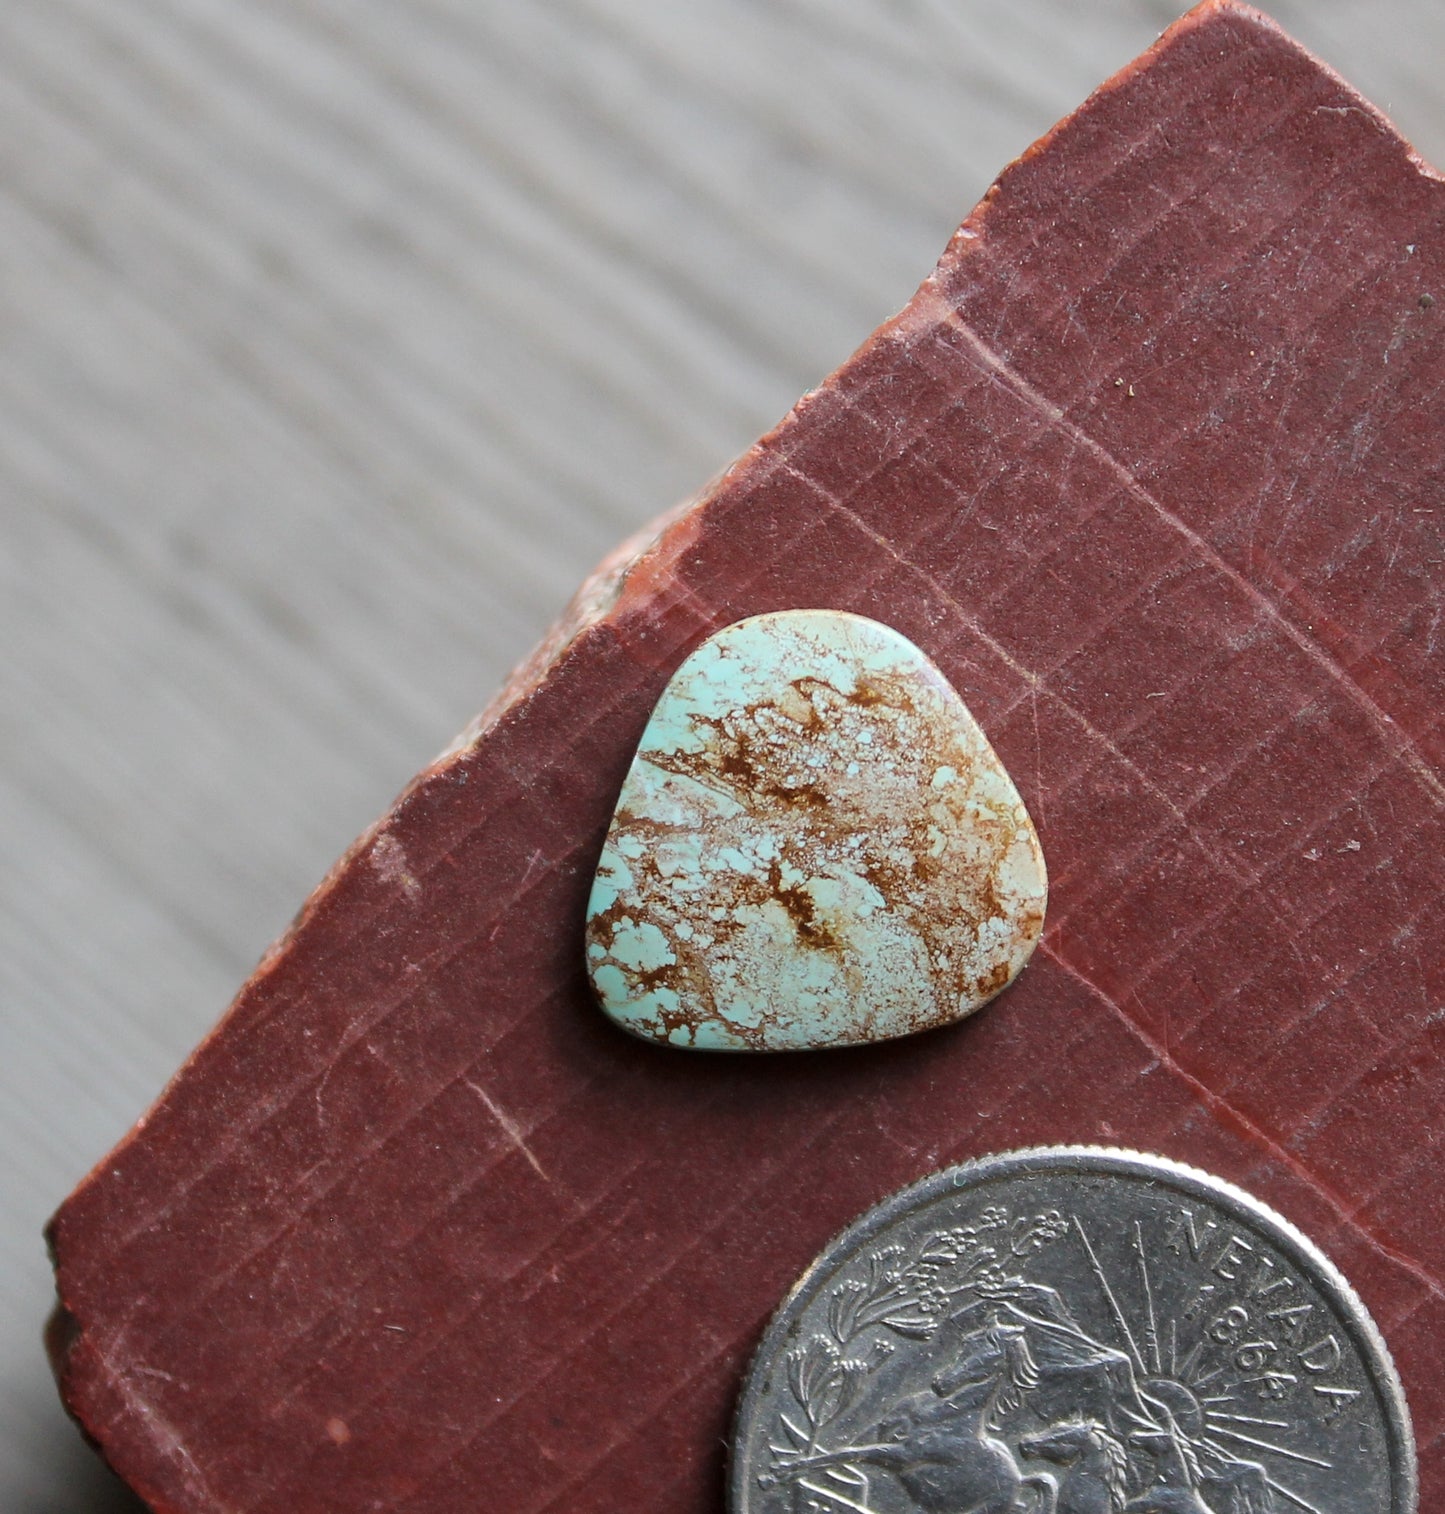 5 carat light blue Stone Mountain Turquoise cabochon with red inclusions